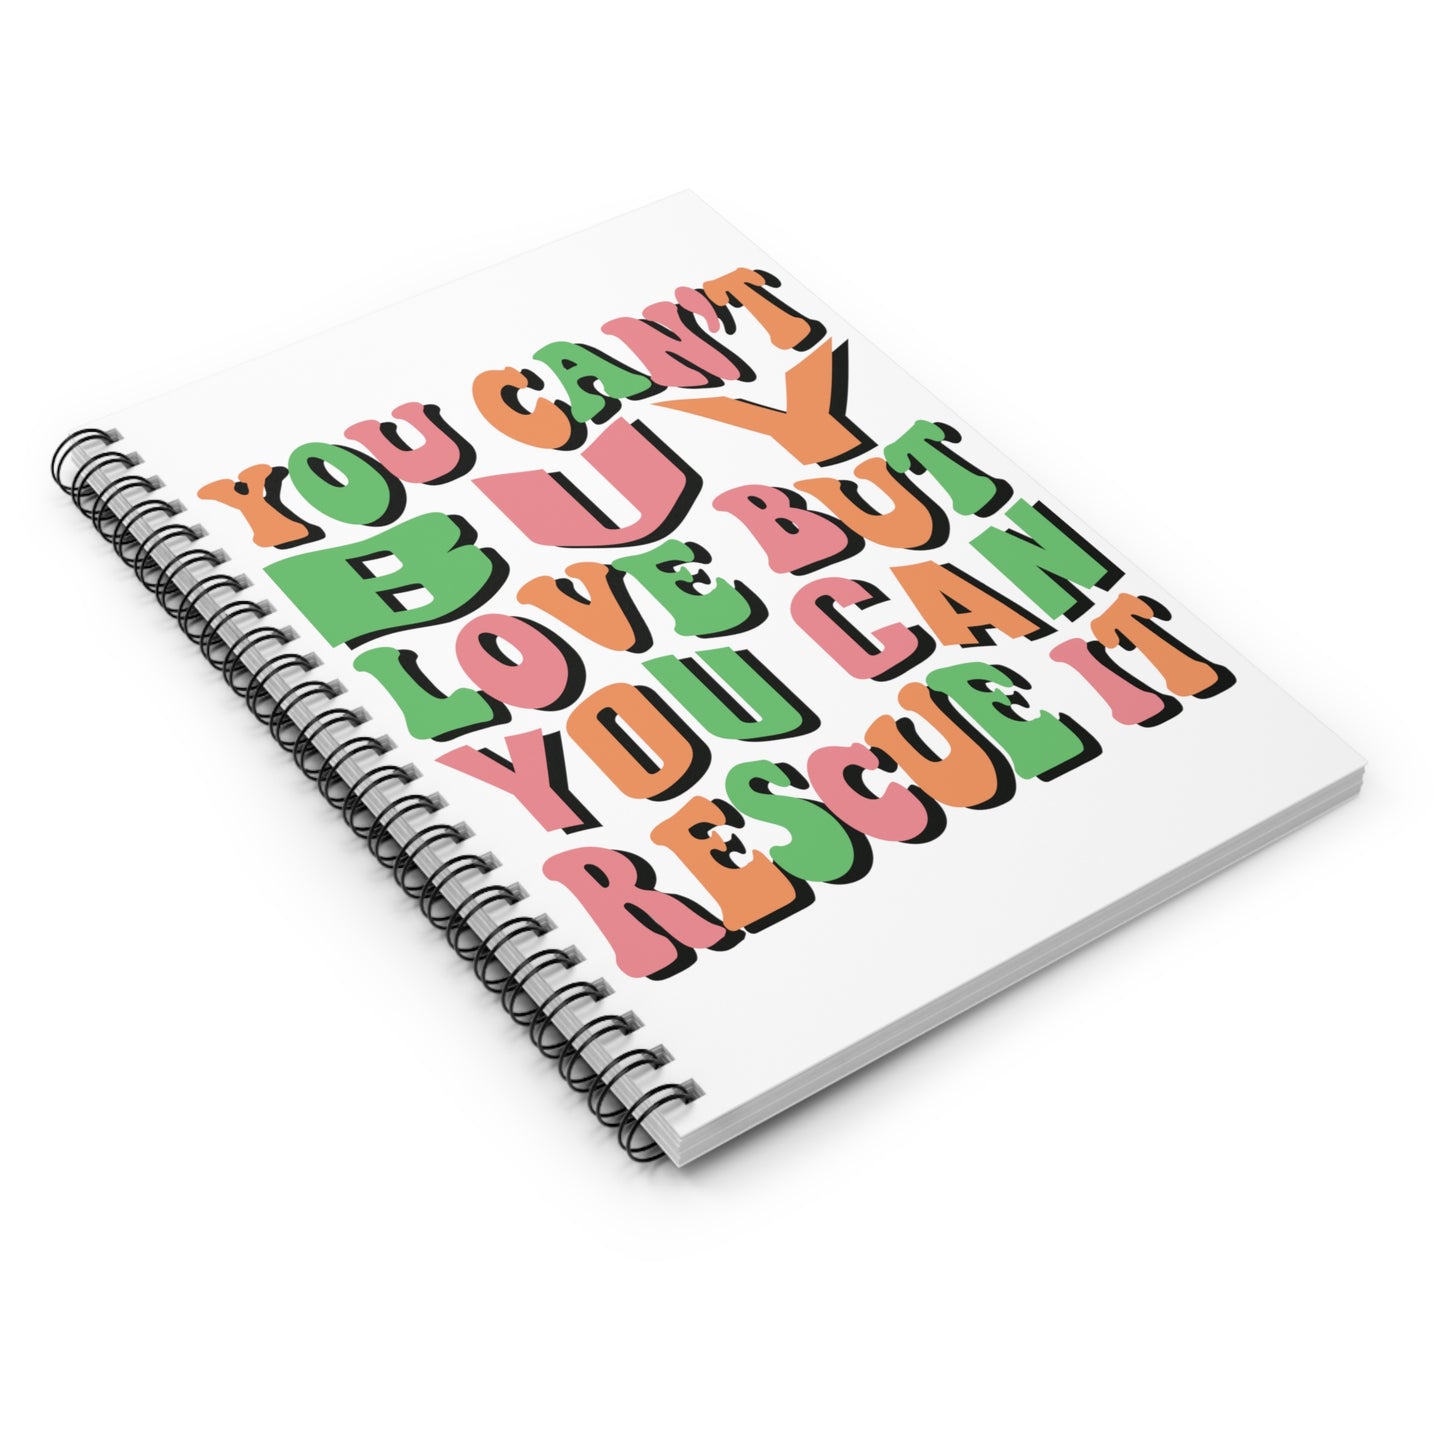 Can't Buy Love: Spiral Notebook - Log Books - Journals - Diaries - and More Custom Printed by TheGlassyLass